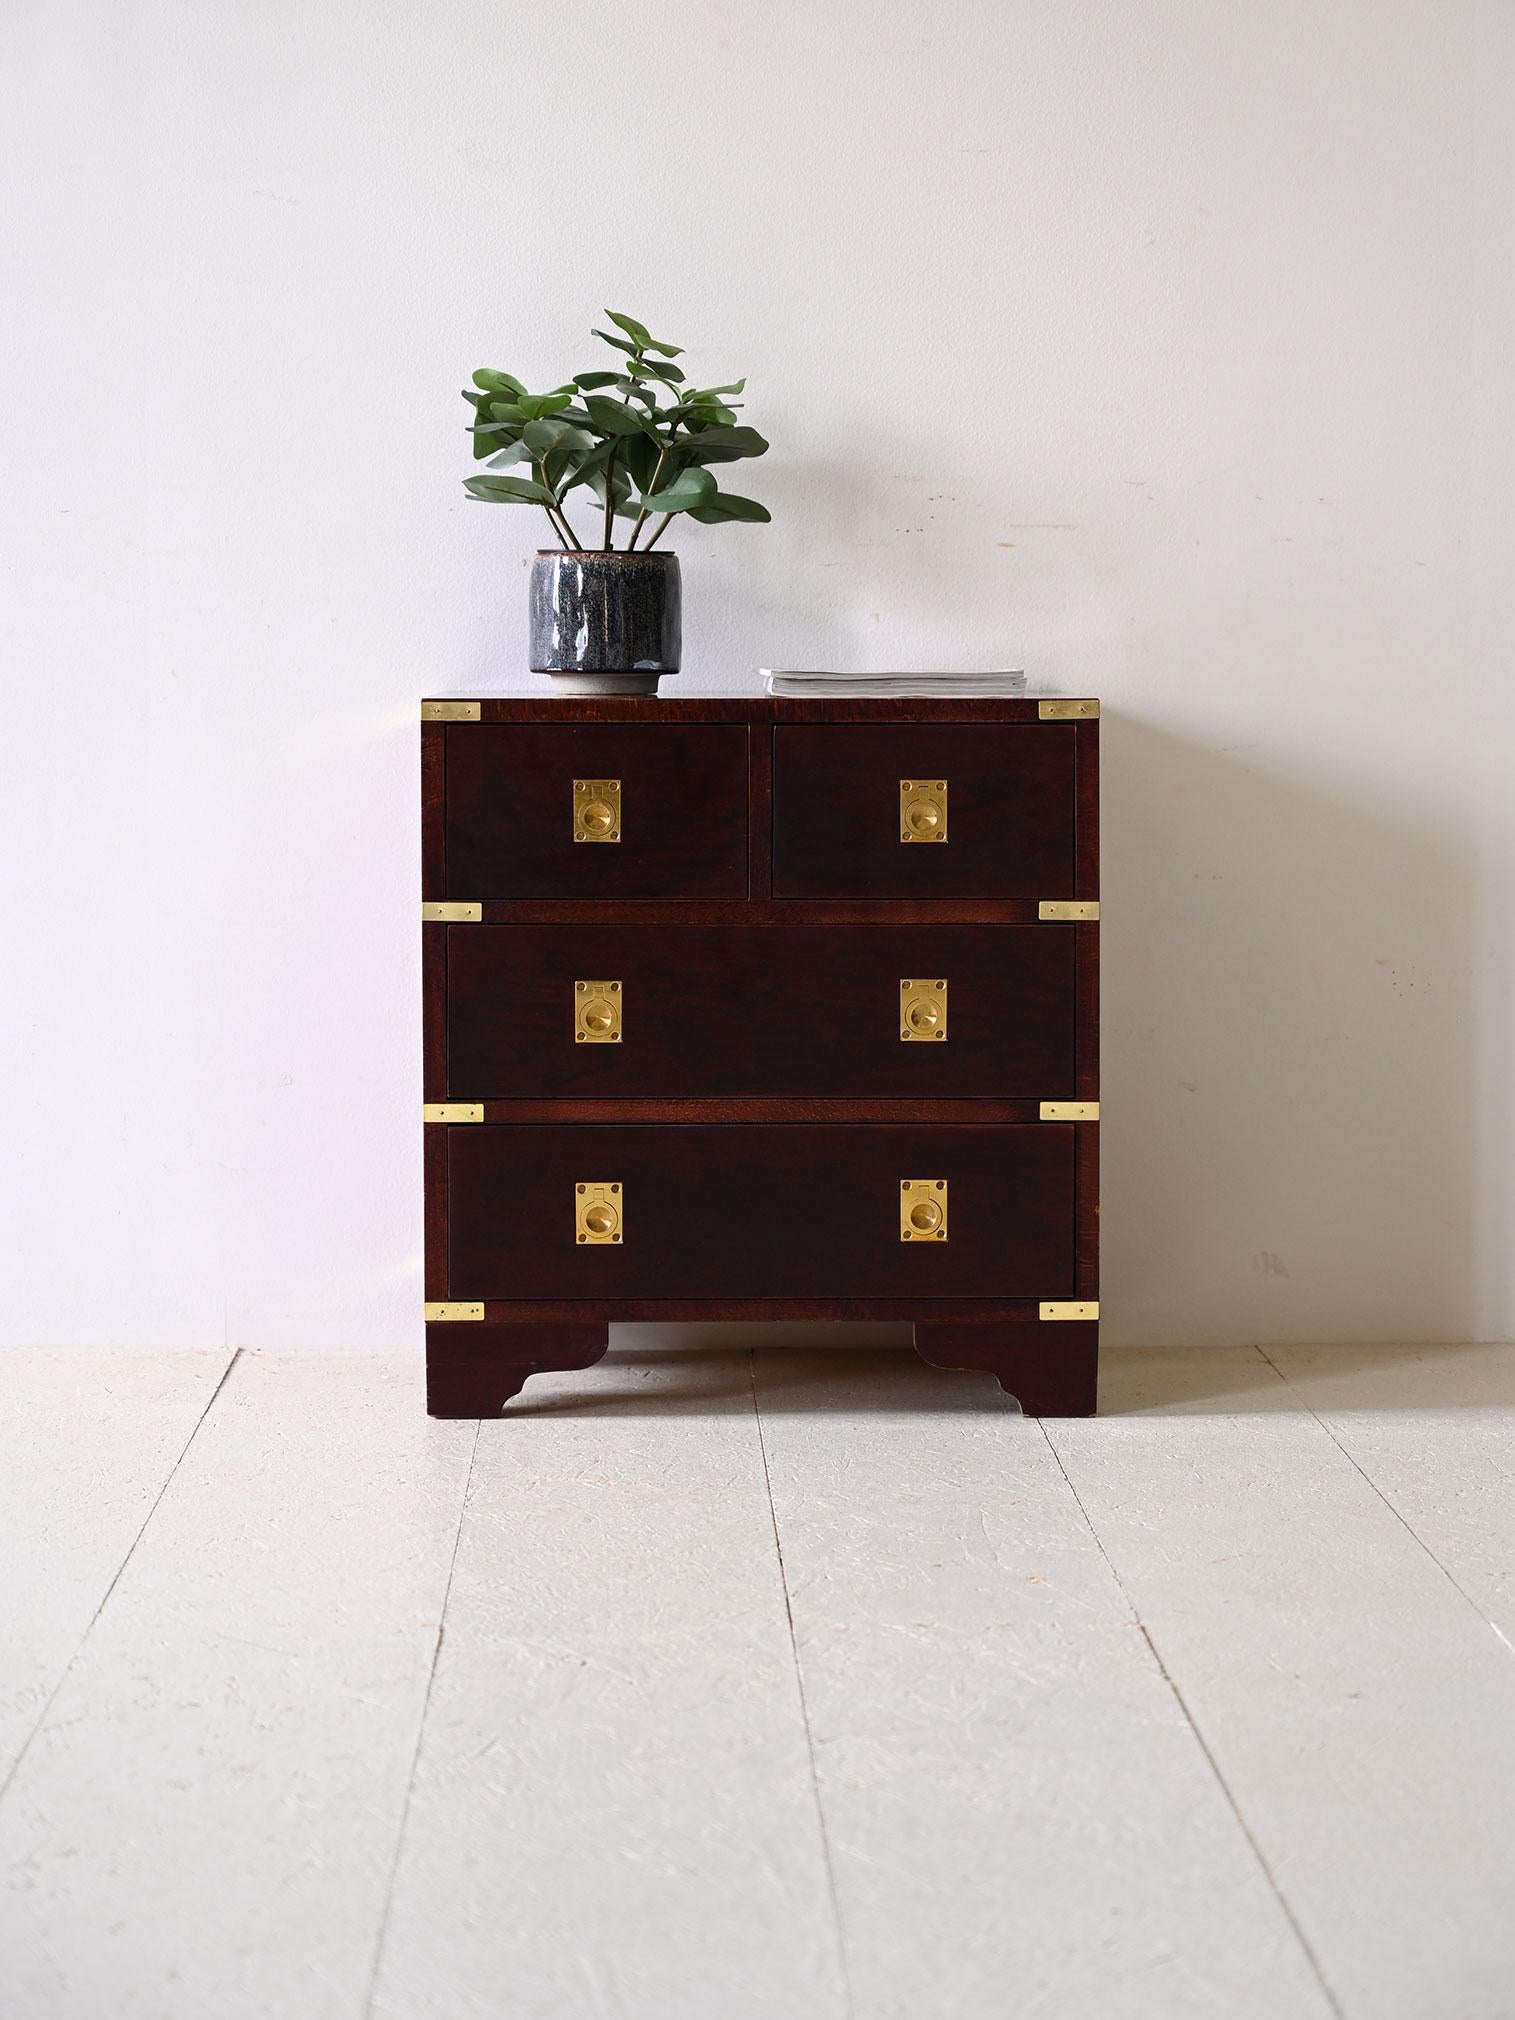 Original vintage Scandinavian chest of drawers.

A Nordic-style mahogany chest of drawers with gilded metal handles with elegant, subtle grooves inward. 

With a simple, square frame, this vintage Scandinavian chest of drawers features two small top